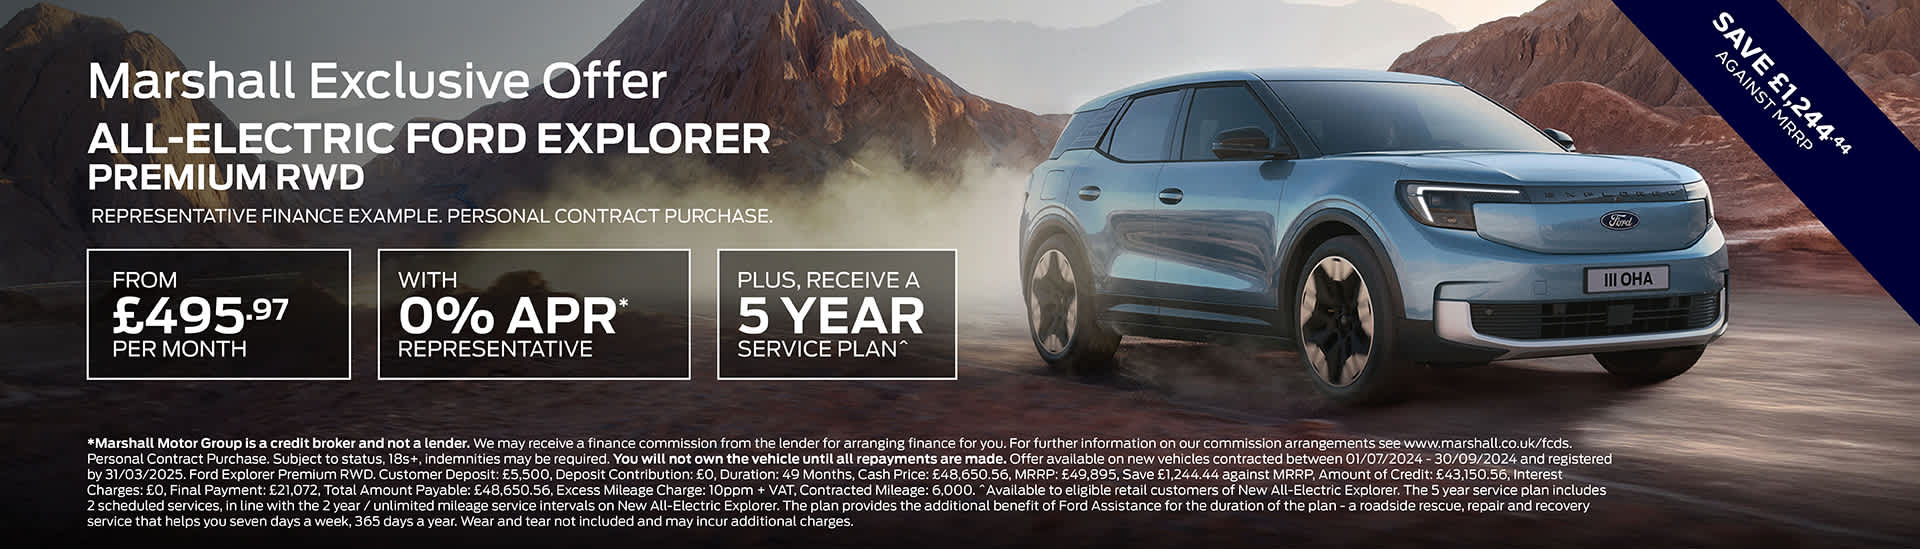 New All-Electric Ford Explorer Personal Contract Purchase Exclusive Offer